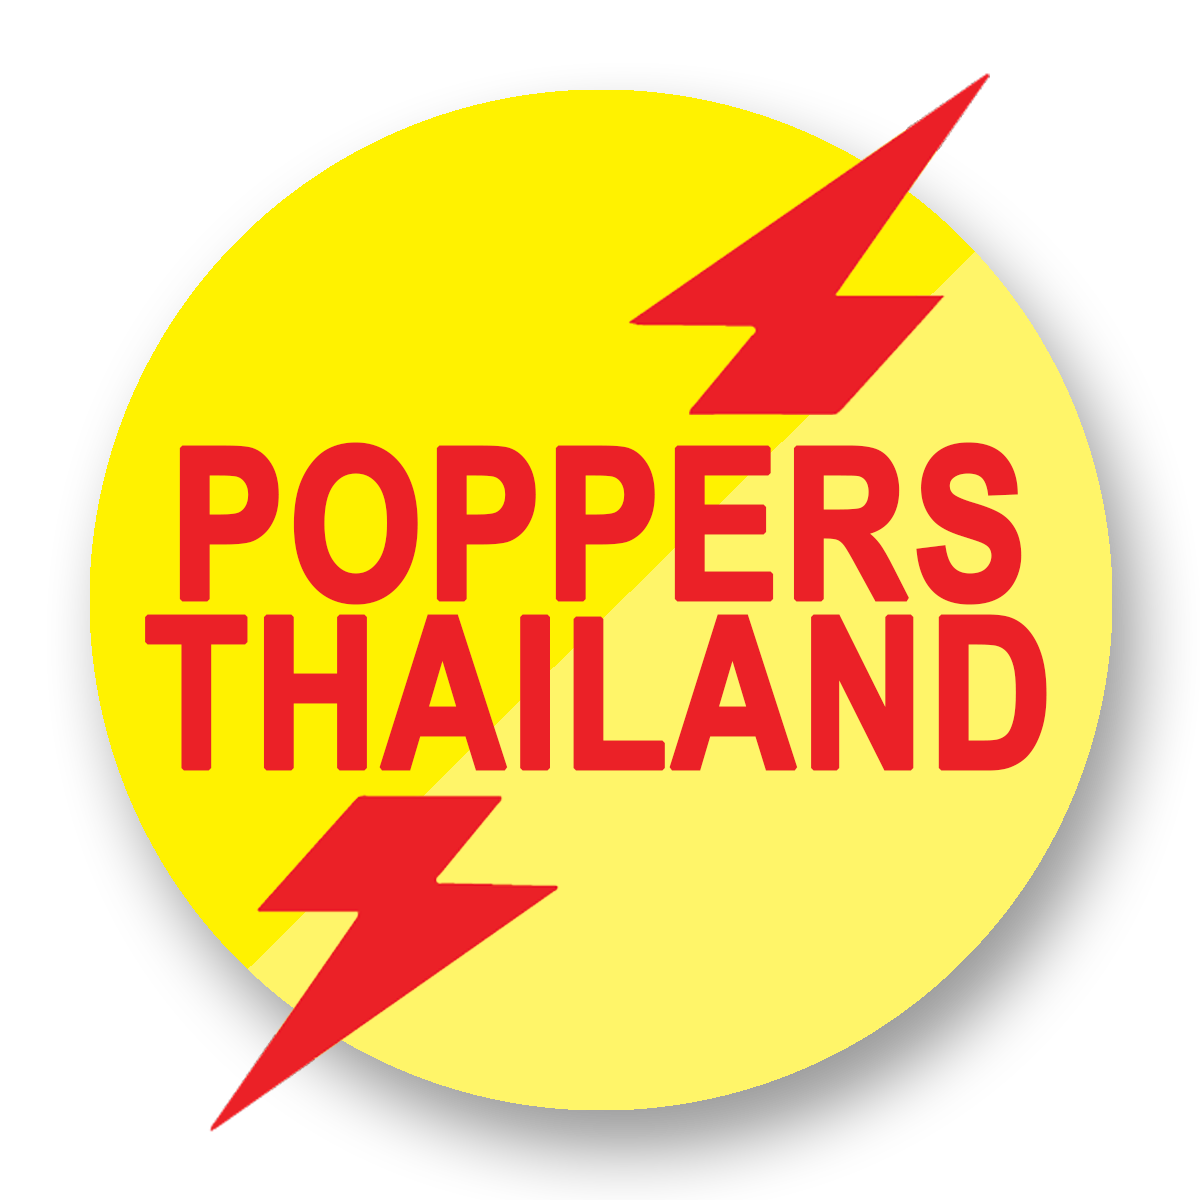 POPPERS THAILAND